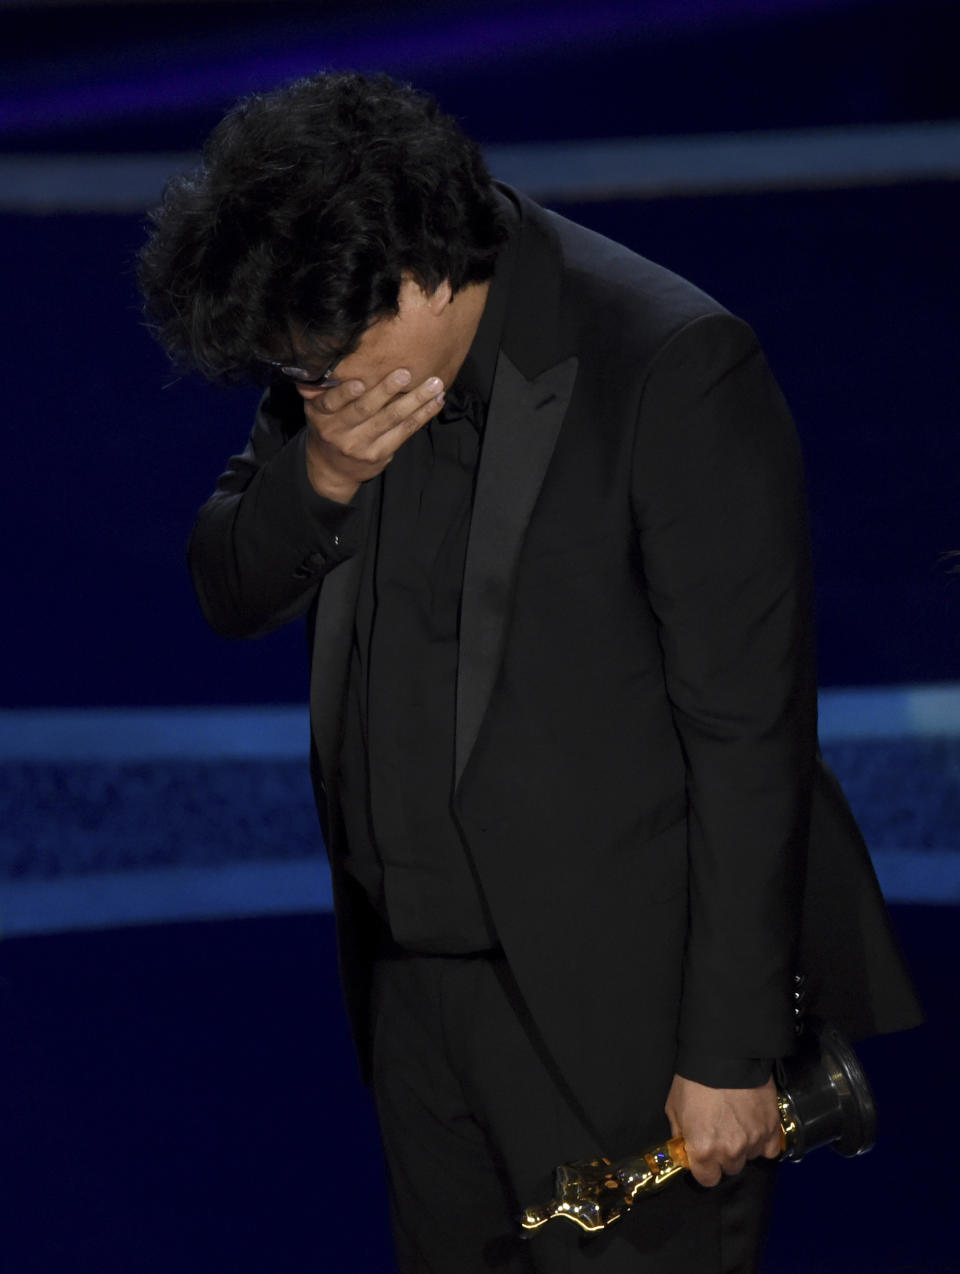 Bong Joon Ho reacts as he accepts the award for best director for "Parasite" at the Oscars on Sunday, Feb. 9, 2020, at the Dolby Theatre in Los Angeles. (AP Photo/Chris Pizzello)